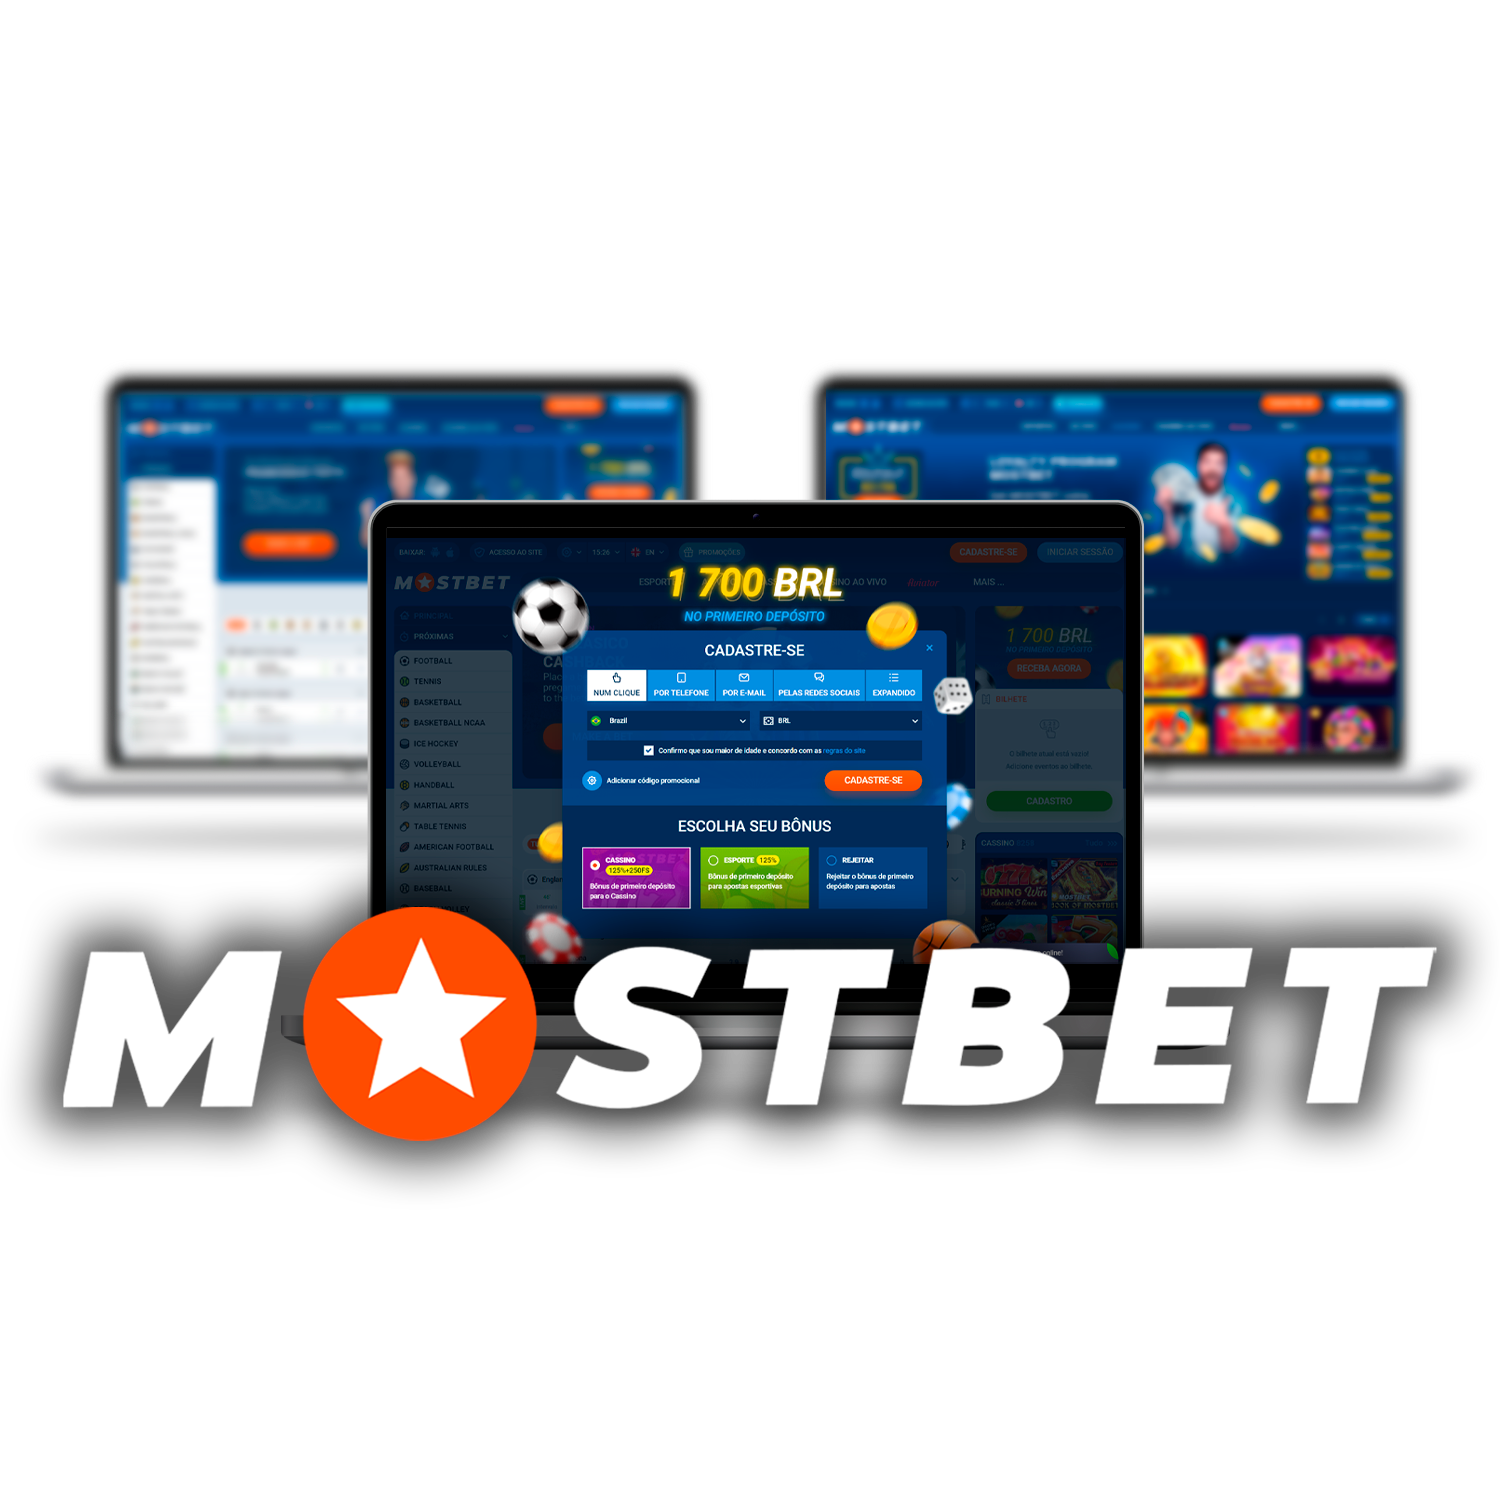 15 No Cost Ways To Get More With Mostbet in Egypt | Your best choice for gambling and betting